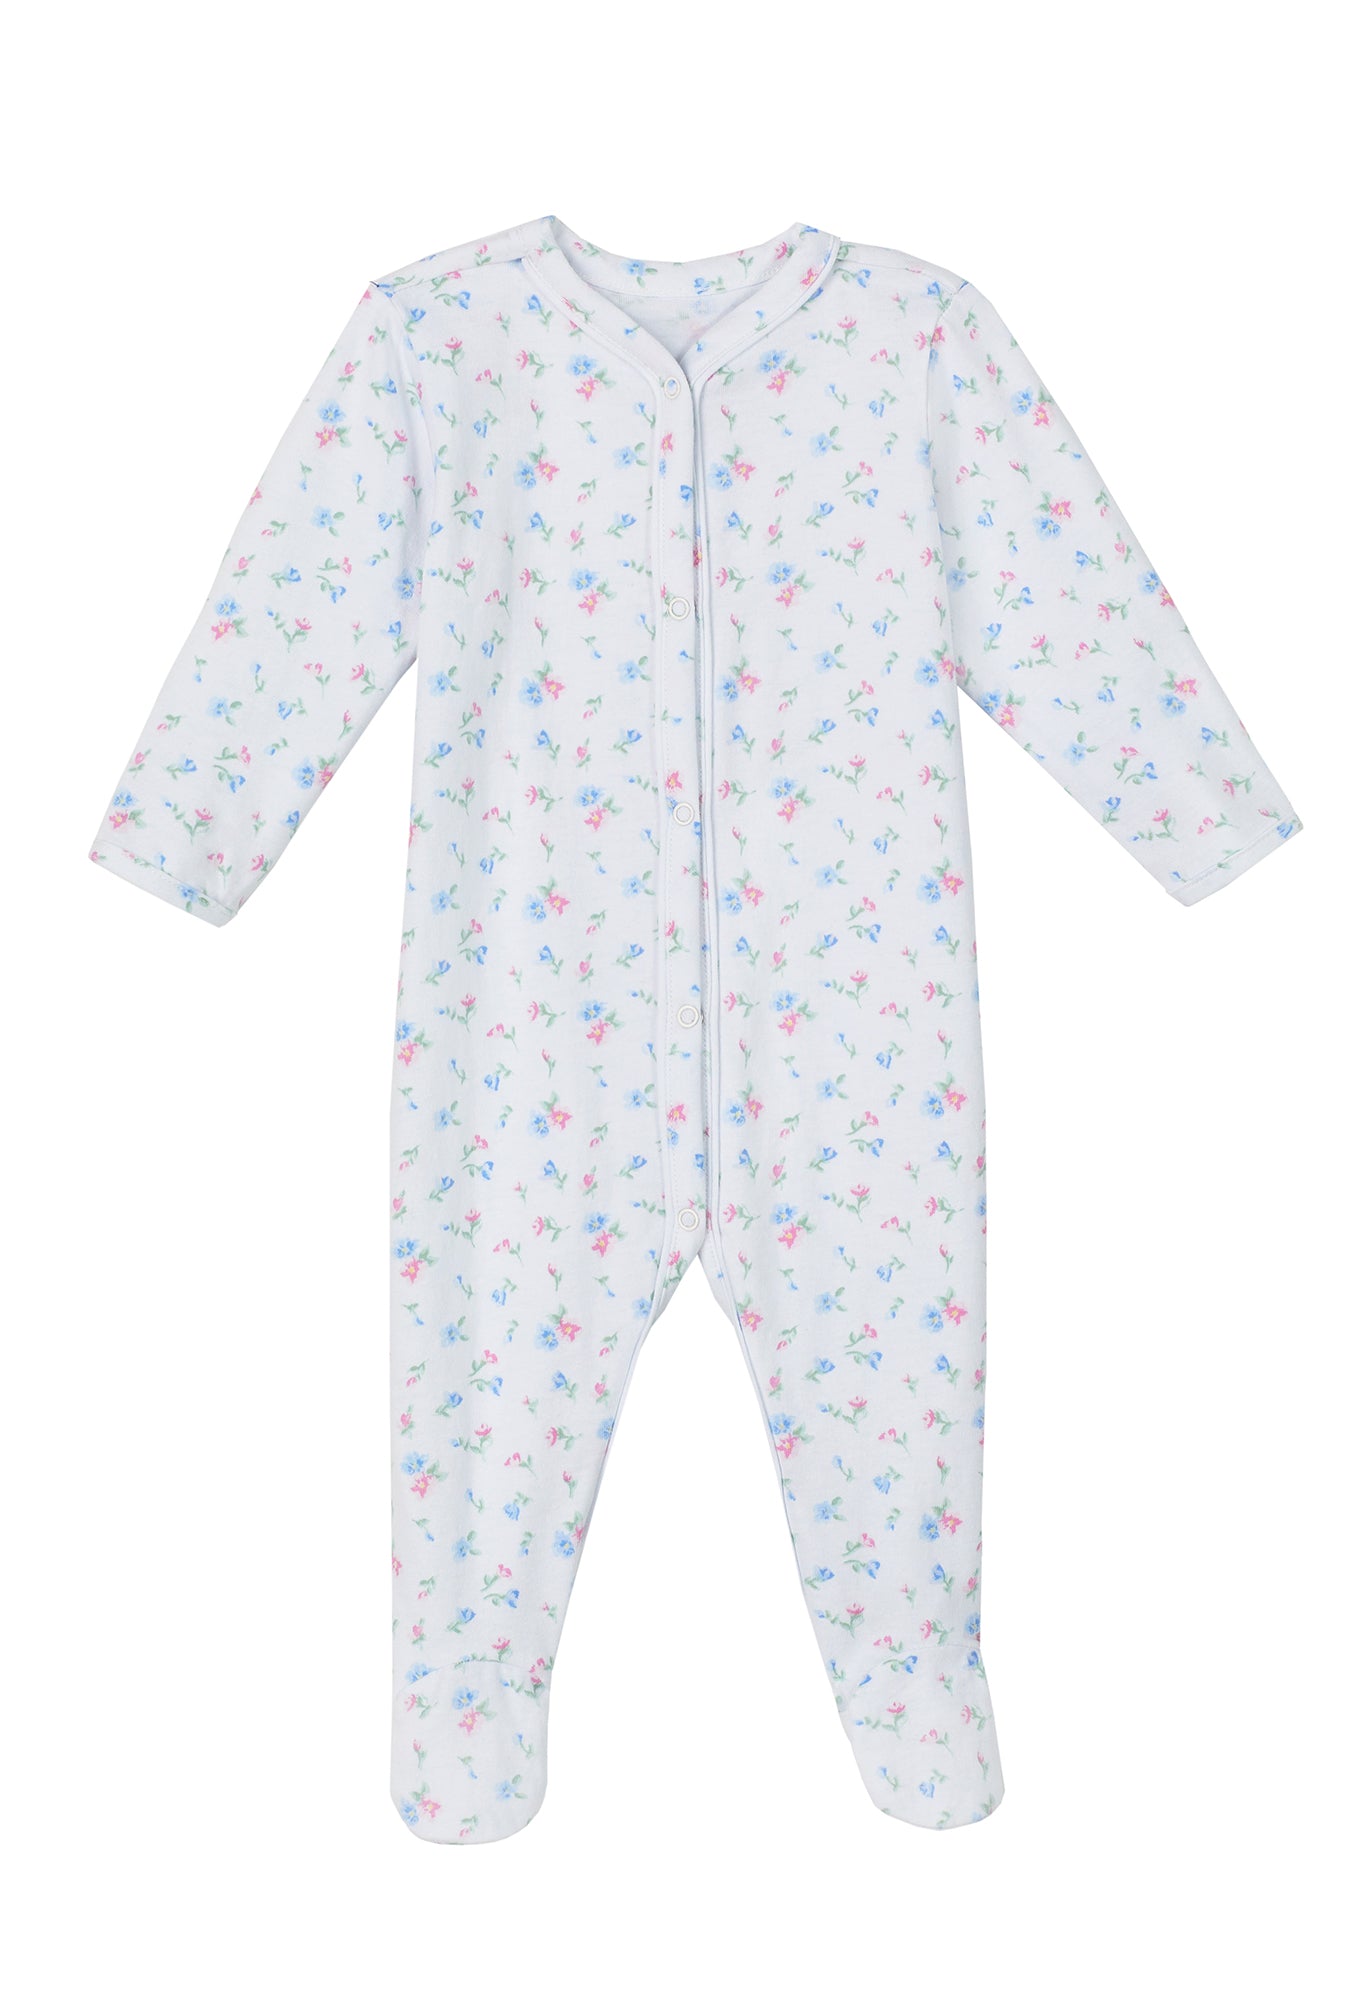 A Baby Onesie Delicate Floral